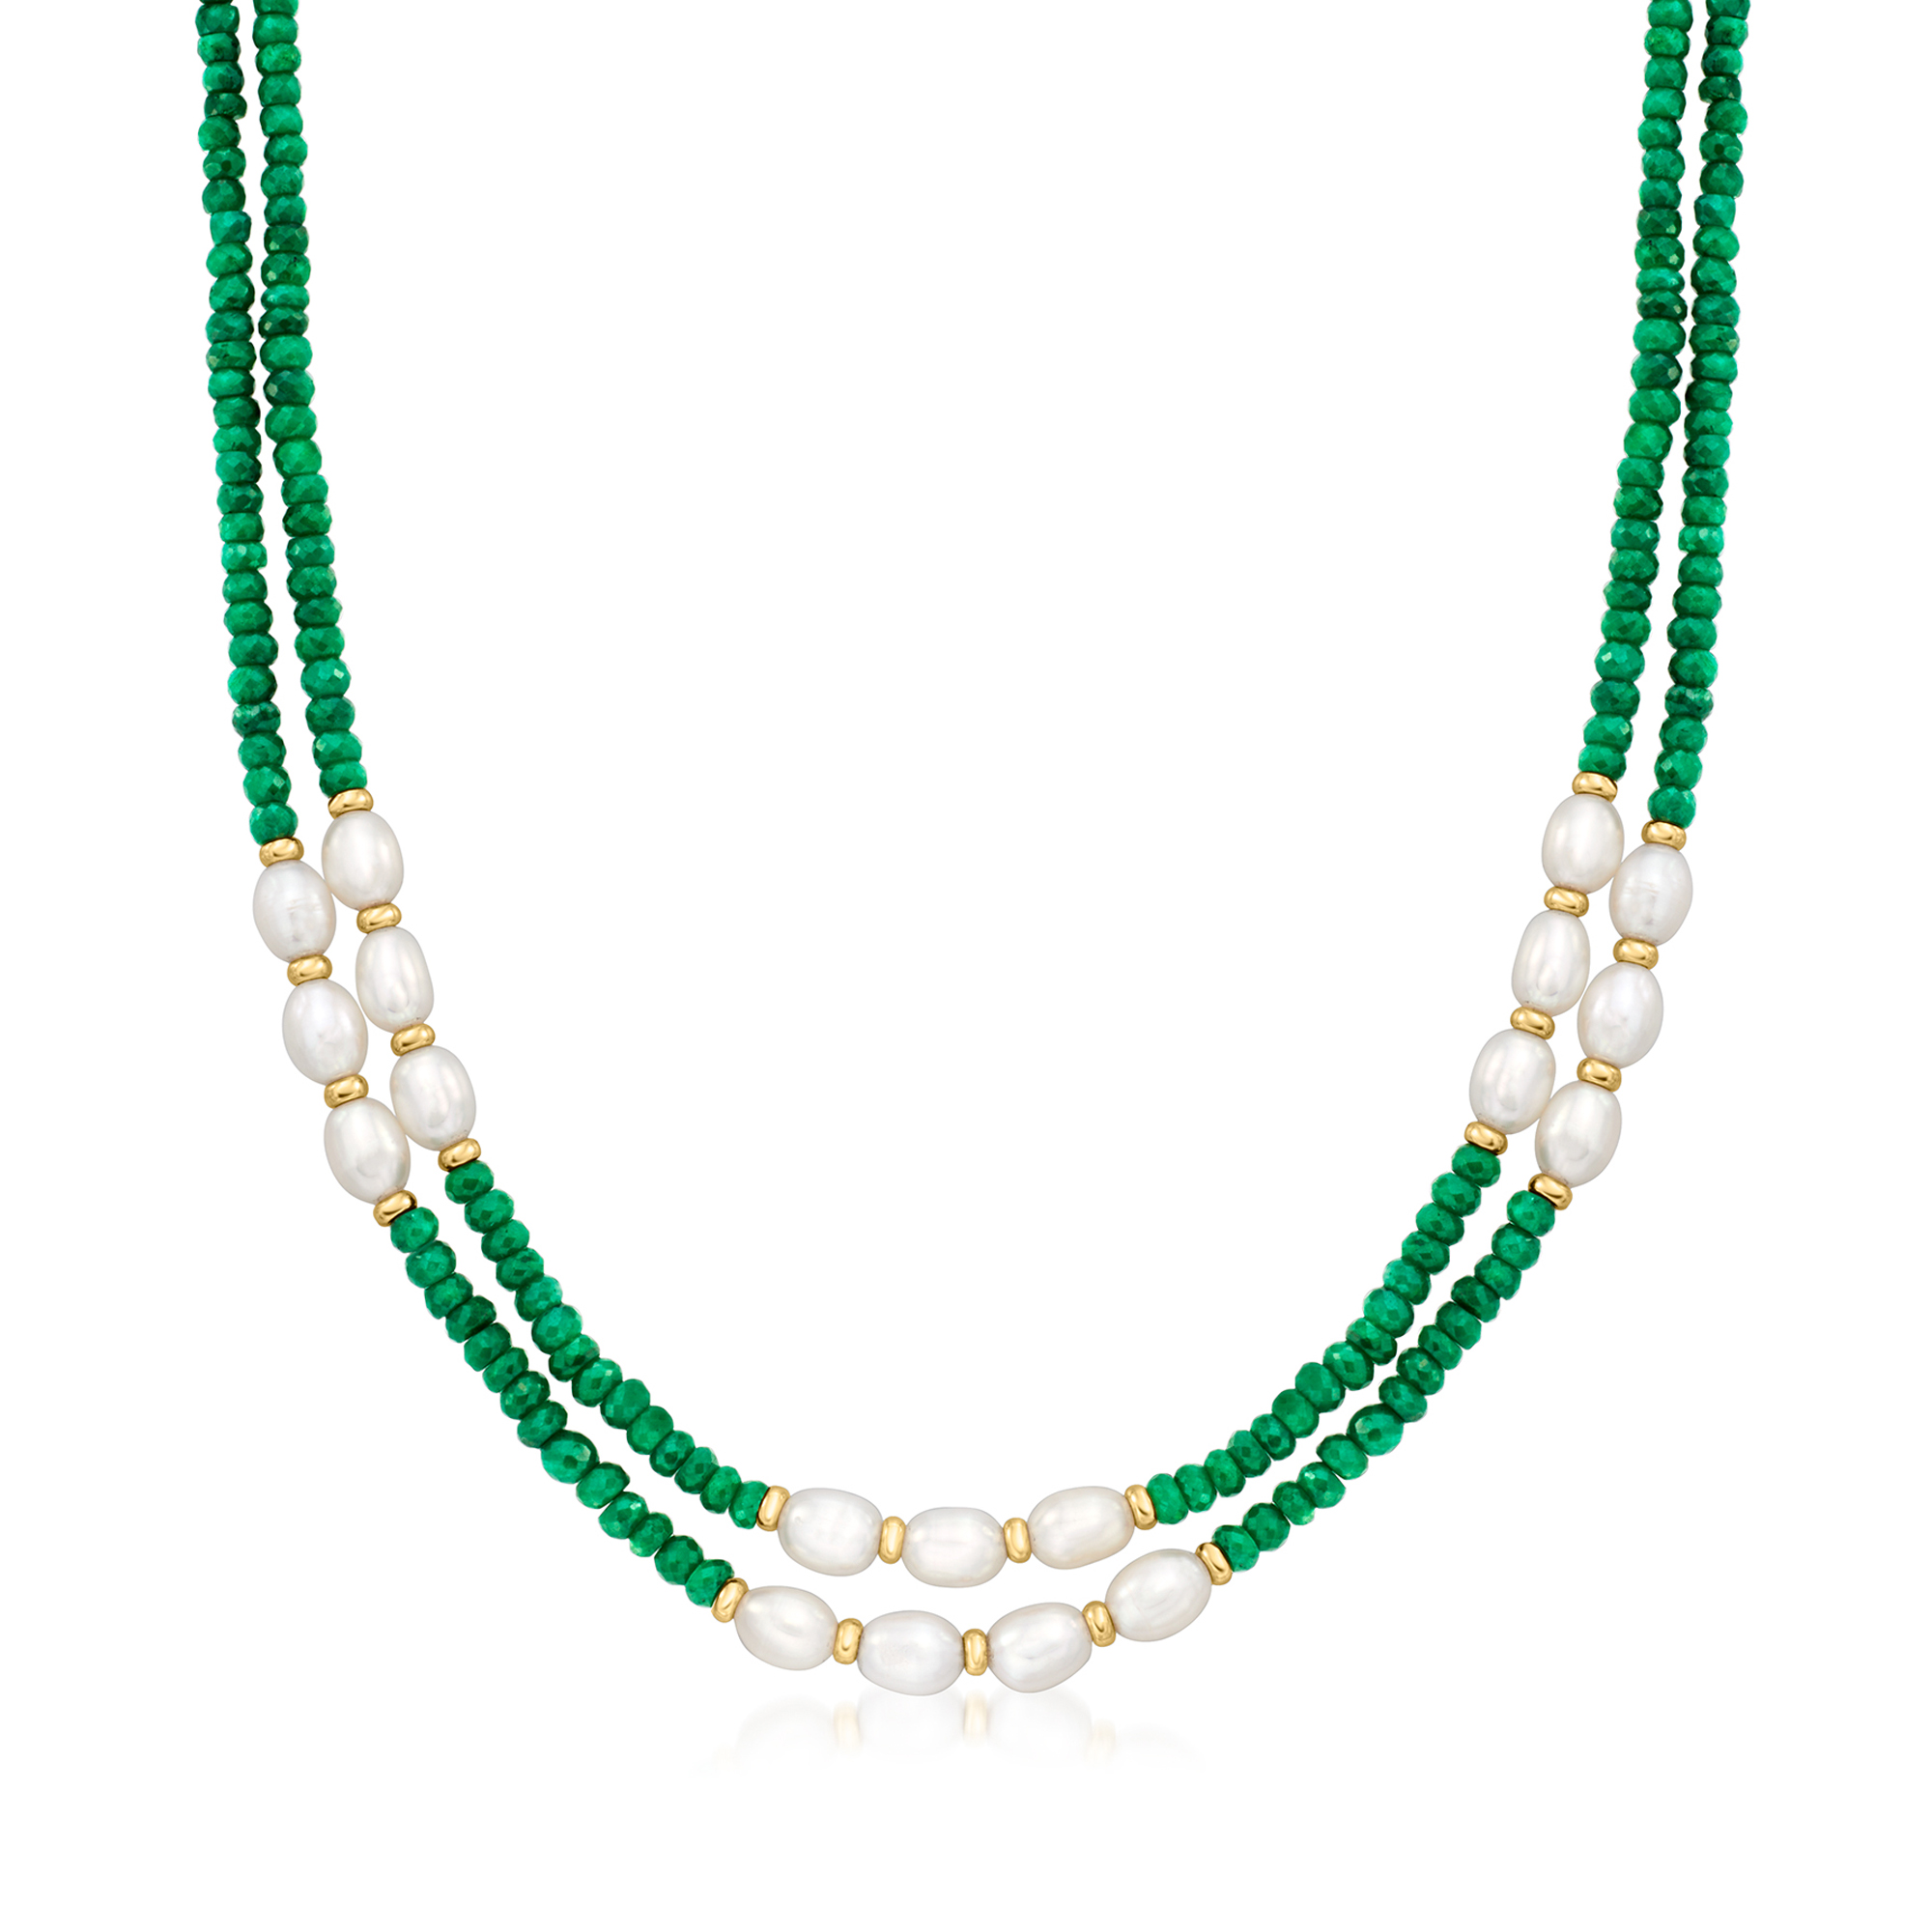 4-5mm Emerald Bead and 7-8mm Cultured Pearl Two-Strand Necklace 